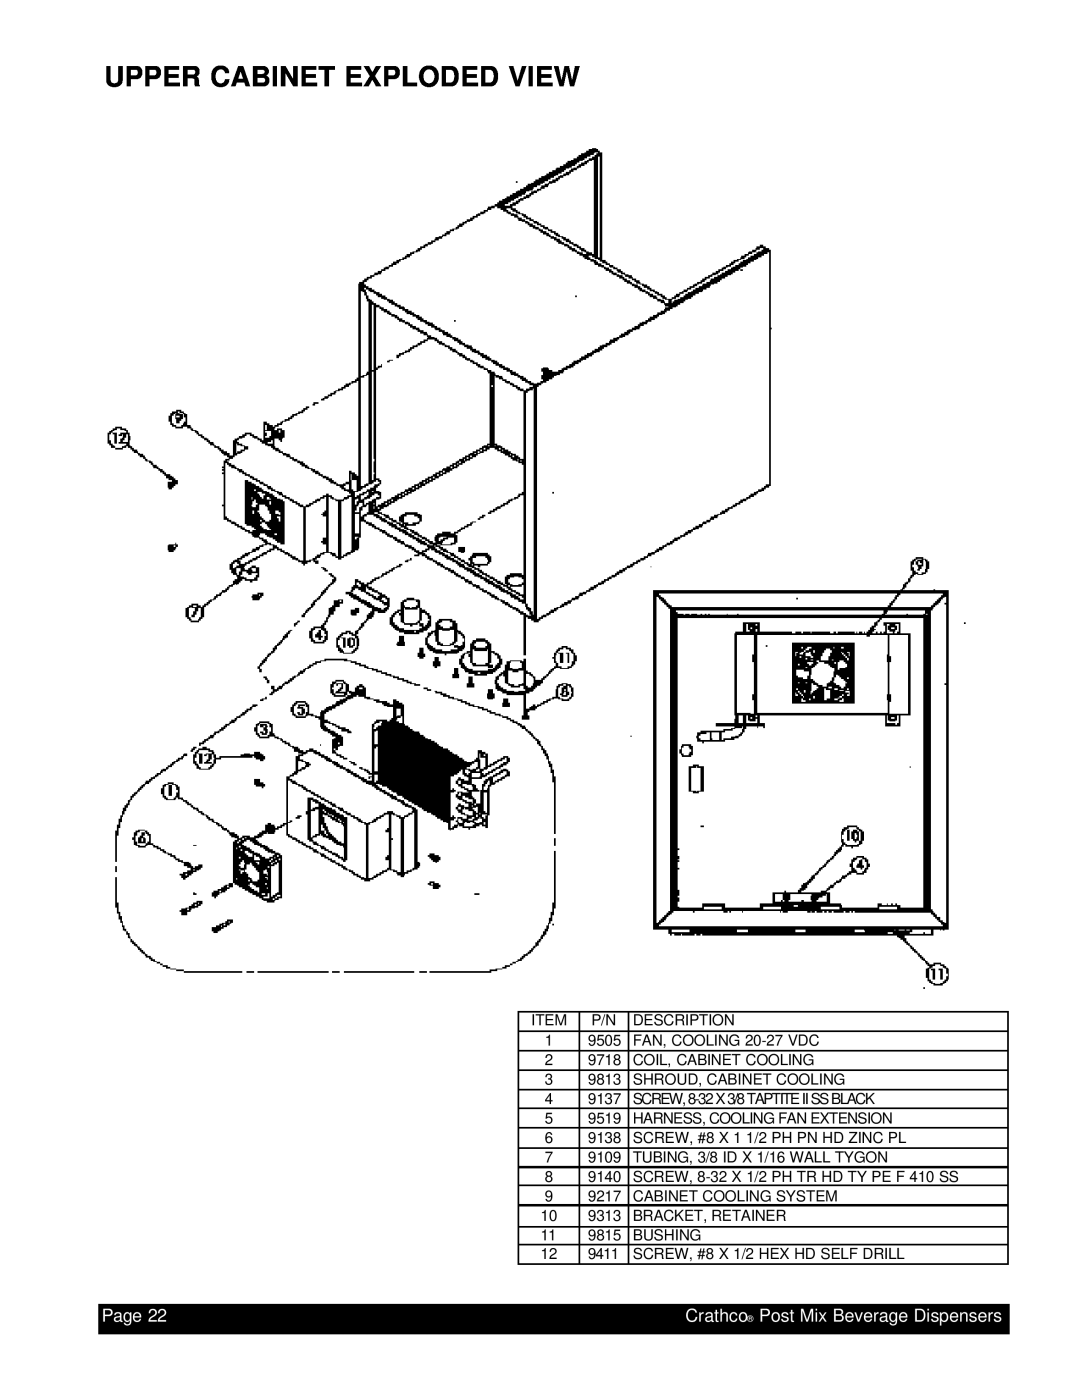 Grindmaster PM4-B, PM45-B instruction manual Upper Cabinet Exploded View, Page, Crathco Post Mix Beverage Dispensers 